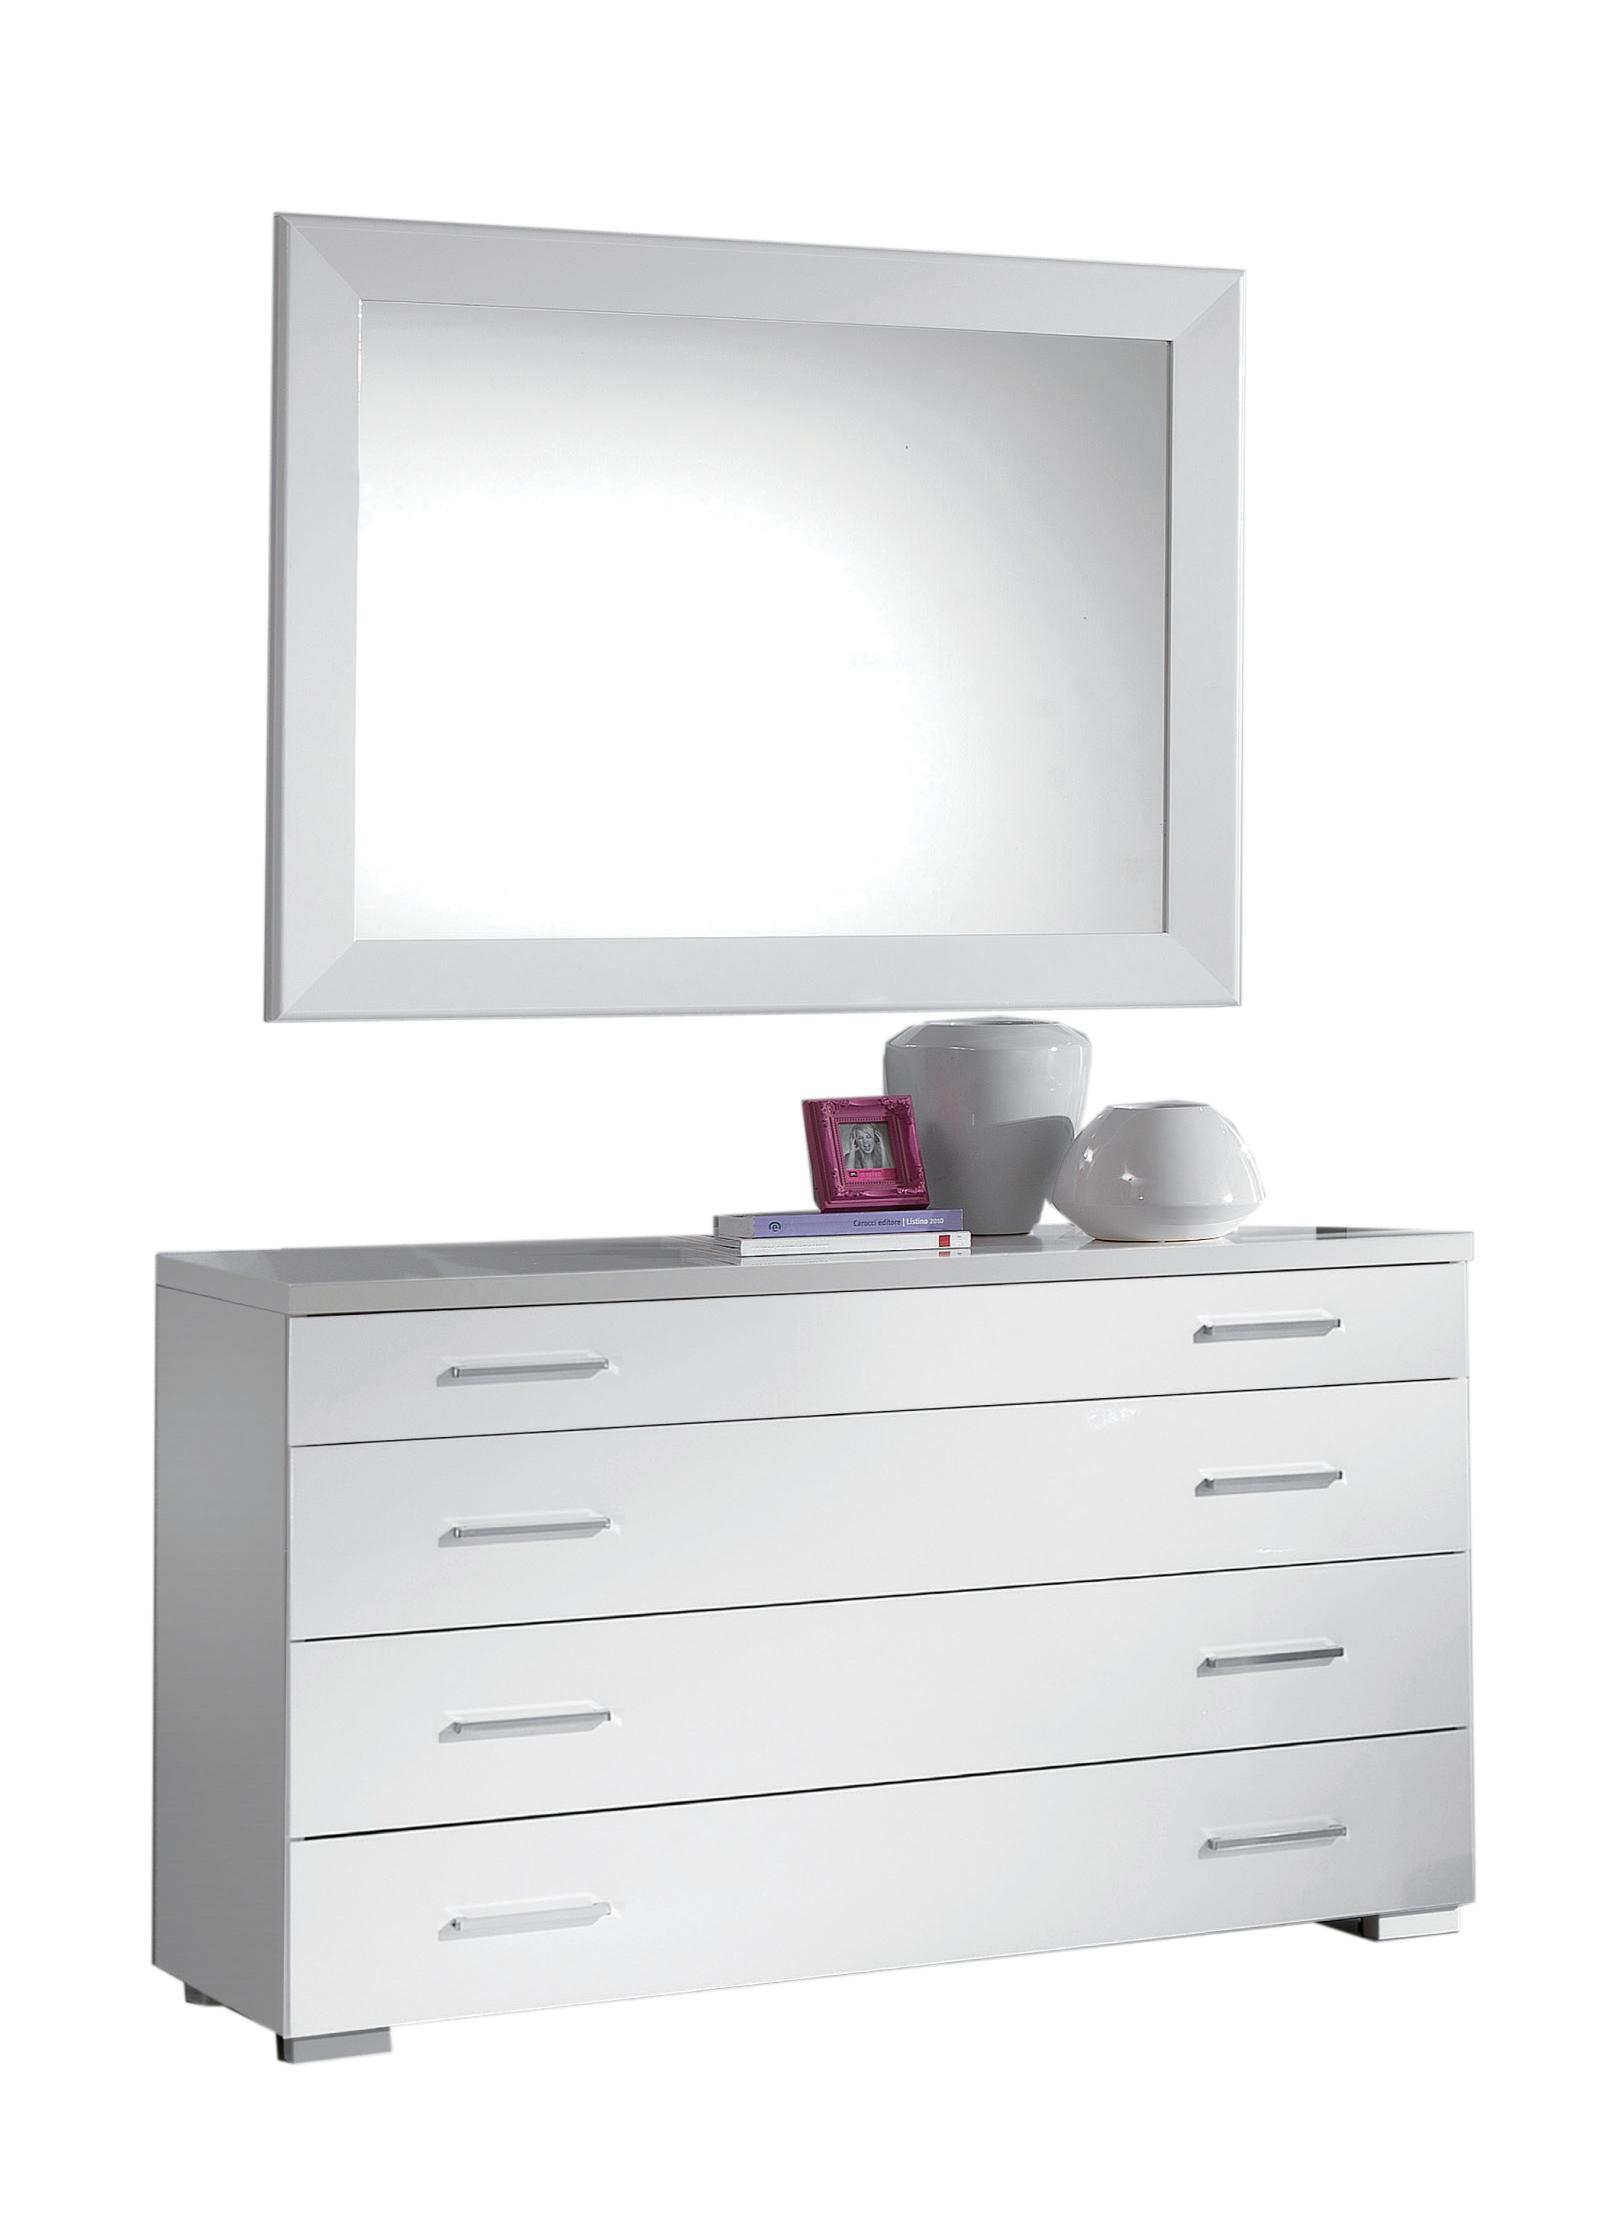 

    
White High Gloss Lacquer 4 Drawer Dresser MOMO ESF Modern MADE IN ITALY
